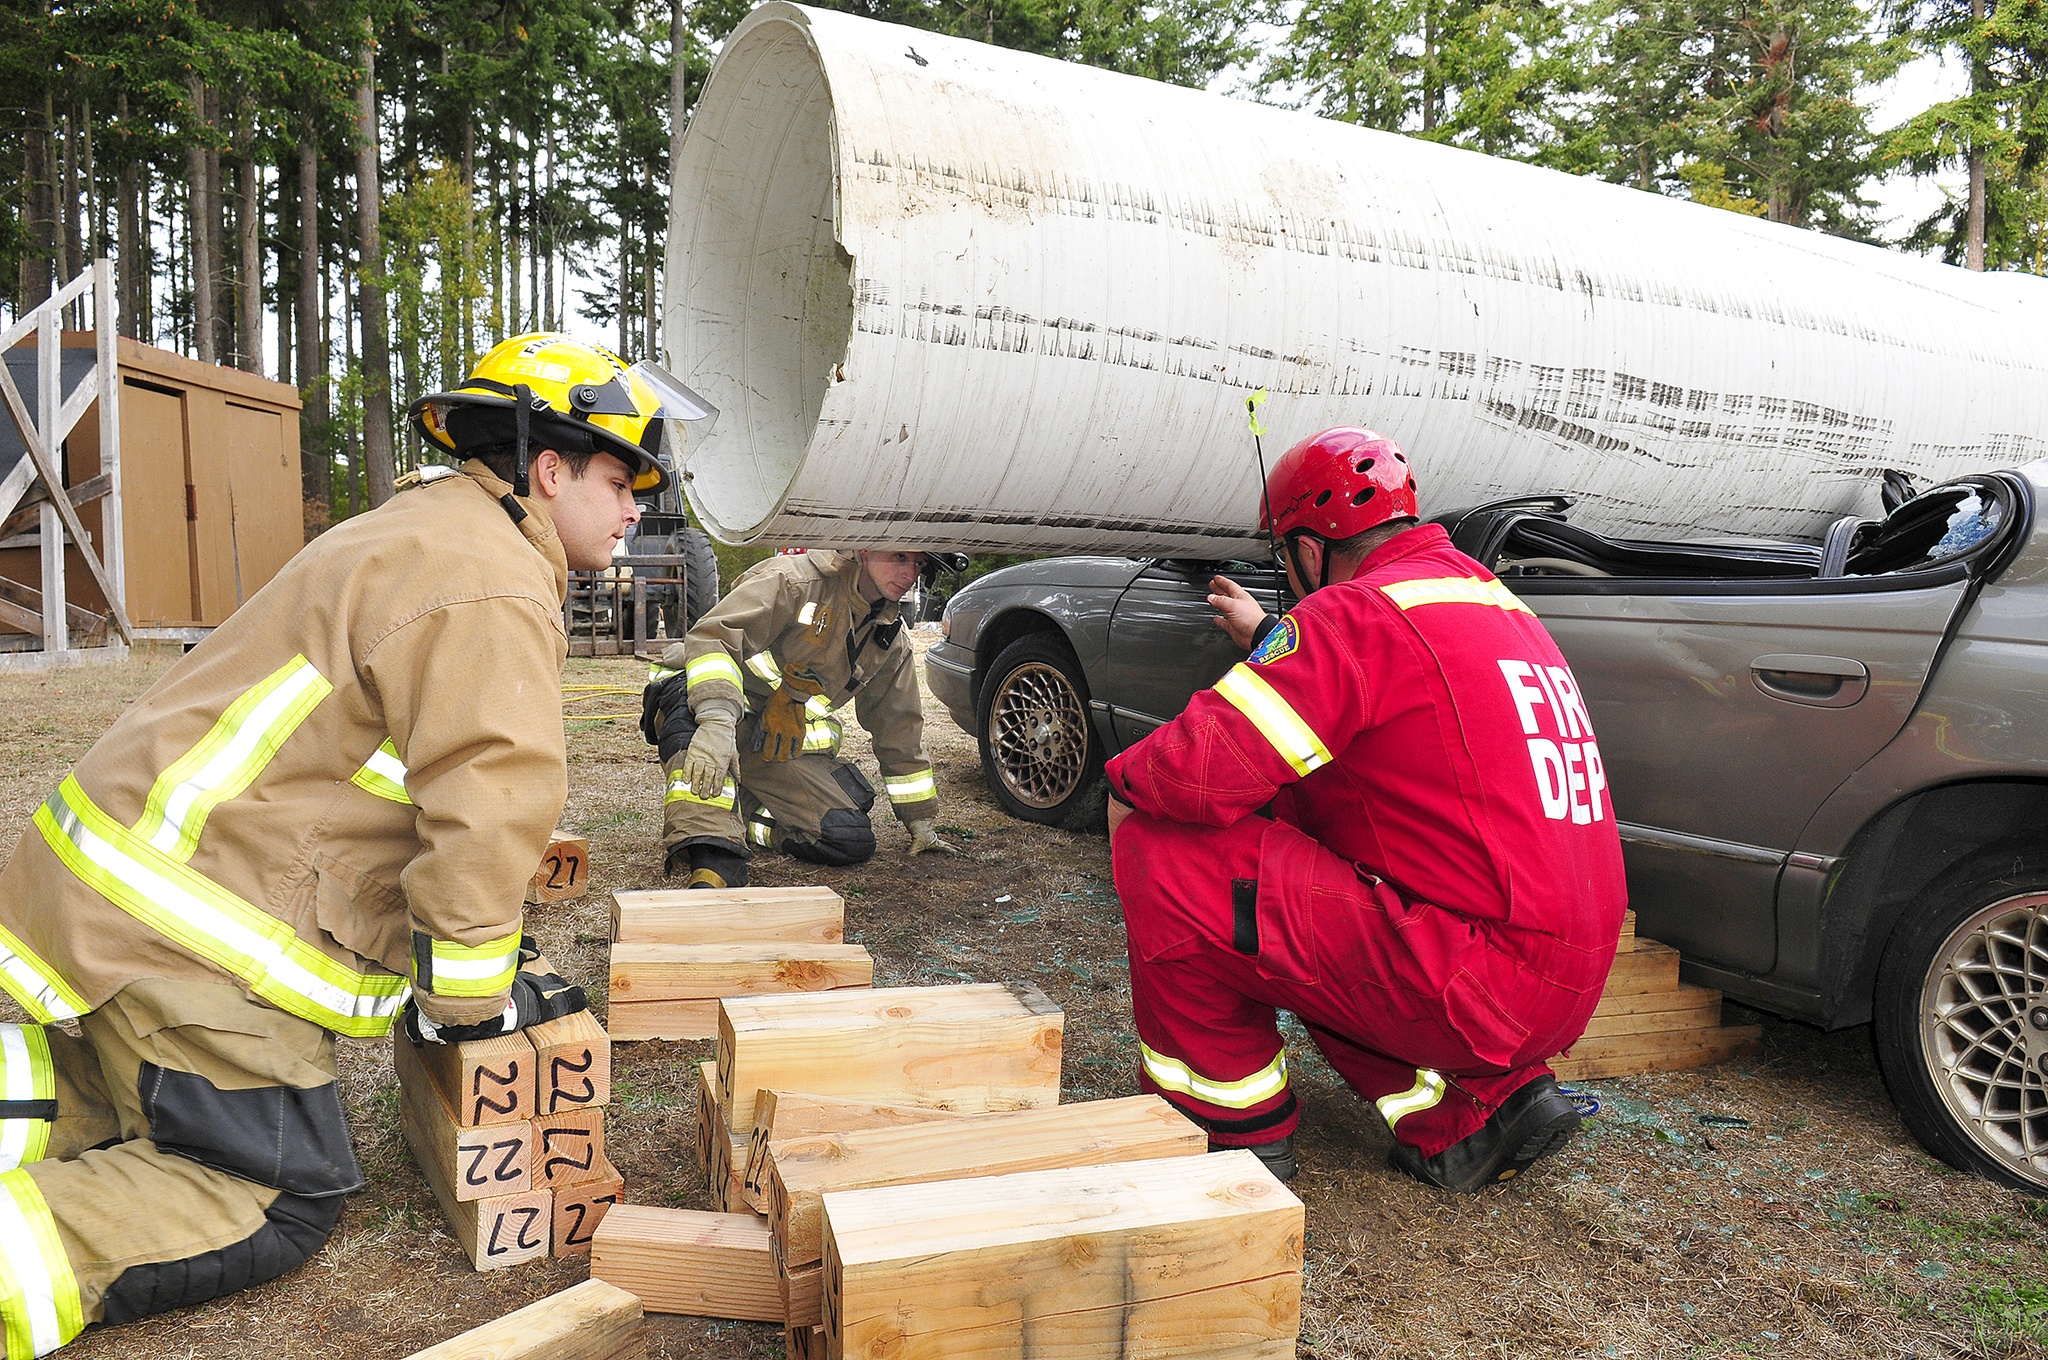 Michael Pelzer, left, Thomas Mohlsick center, and Ryan McCarthy, right, all volunteers of the North Whidbey Fire andRescue conduct extraction training Saturday in Oak Harbor. Photo by Michael Watkins/Whidbey News-Times